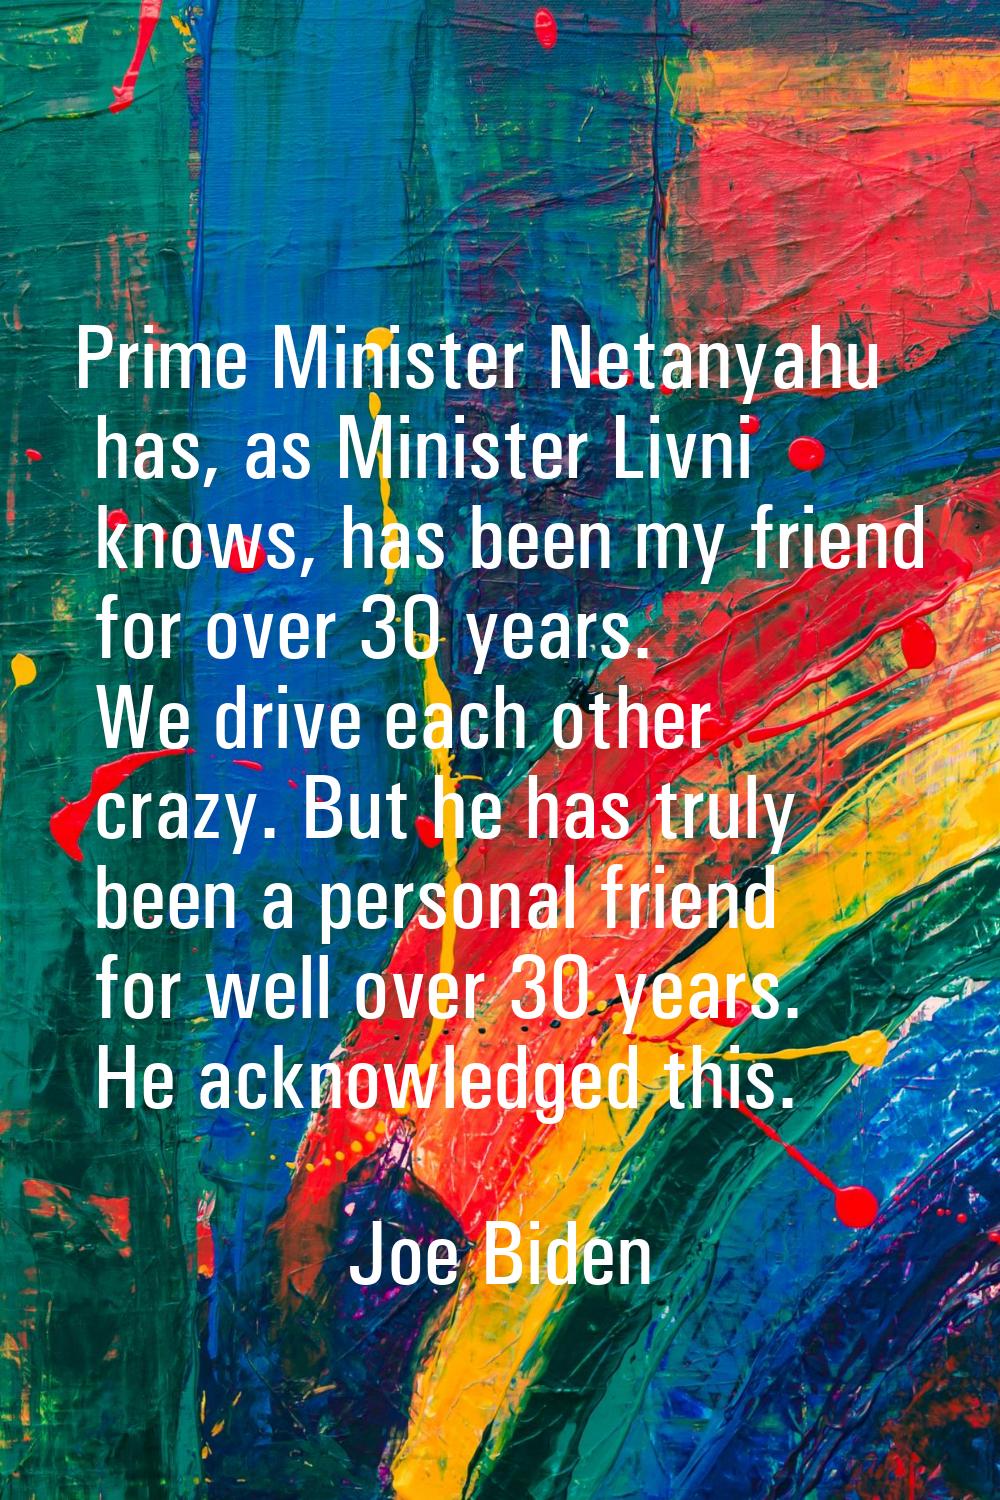 Prime Minister Netanyahu has, as Minister Livni knows, has been my friend for over 30 years. We dri